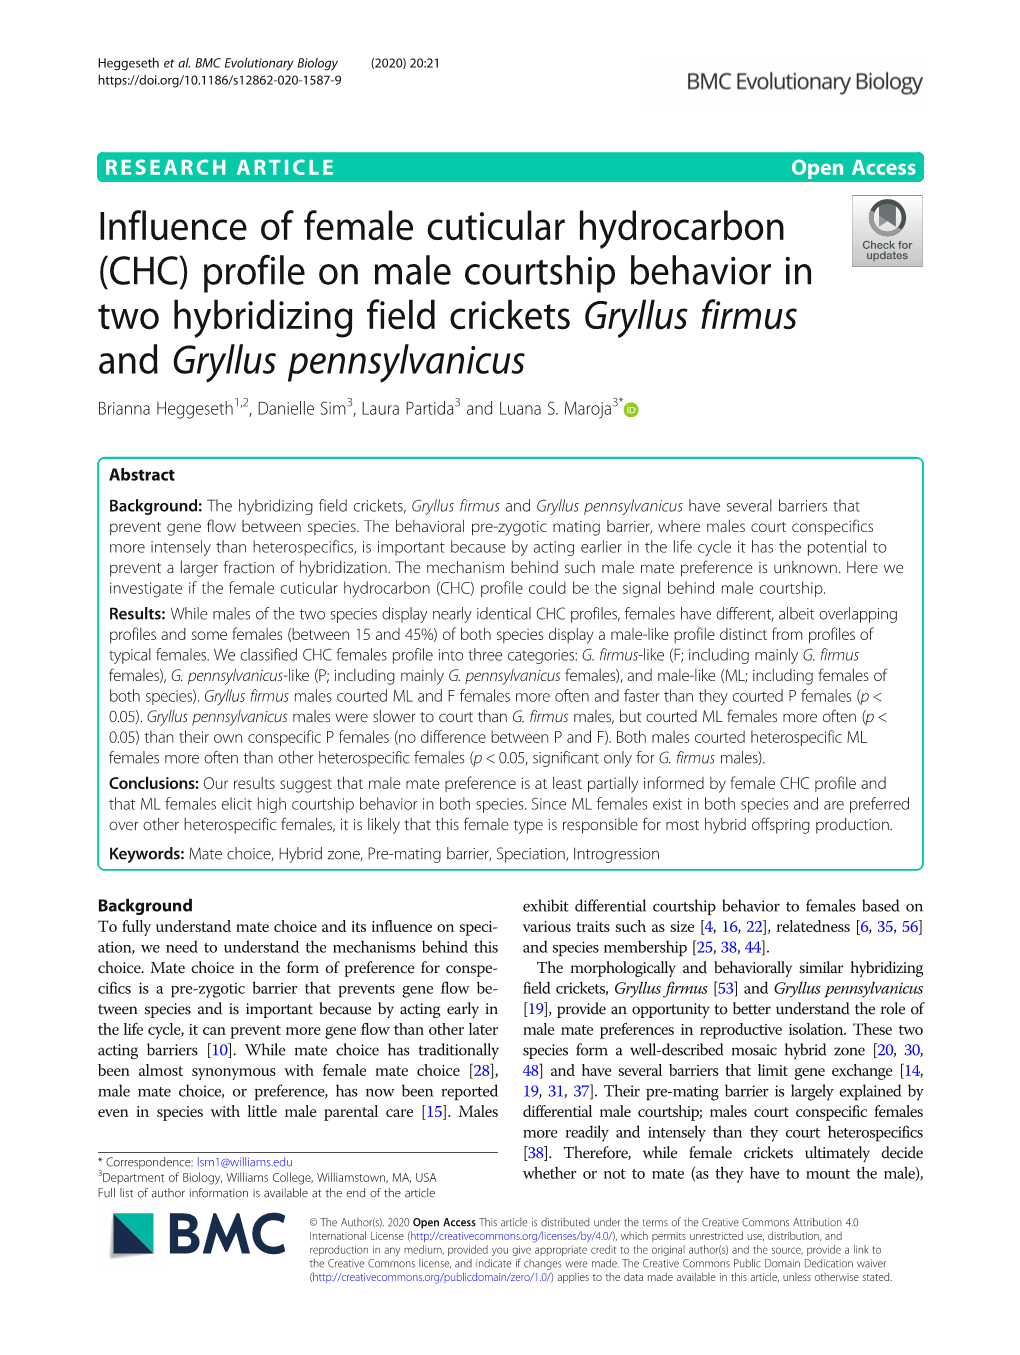 Influence of Female Cuticular Hydrocarbon (CHC) Profile on Male Courtship Behavior in Two Hybridizing Field Crickets Gryllus